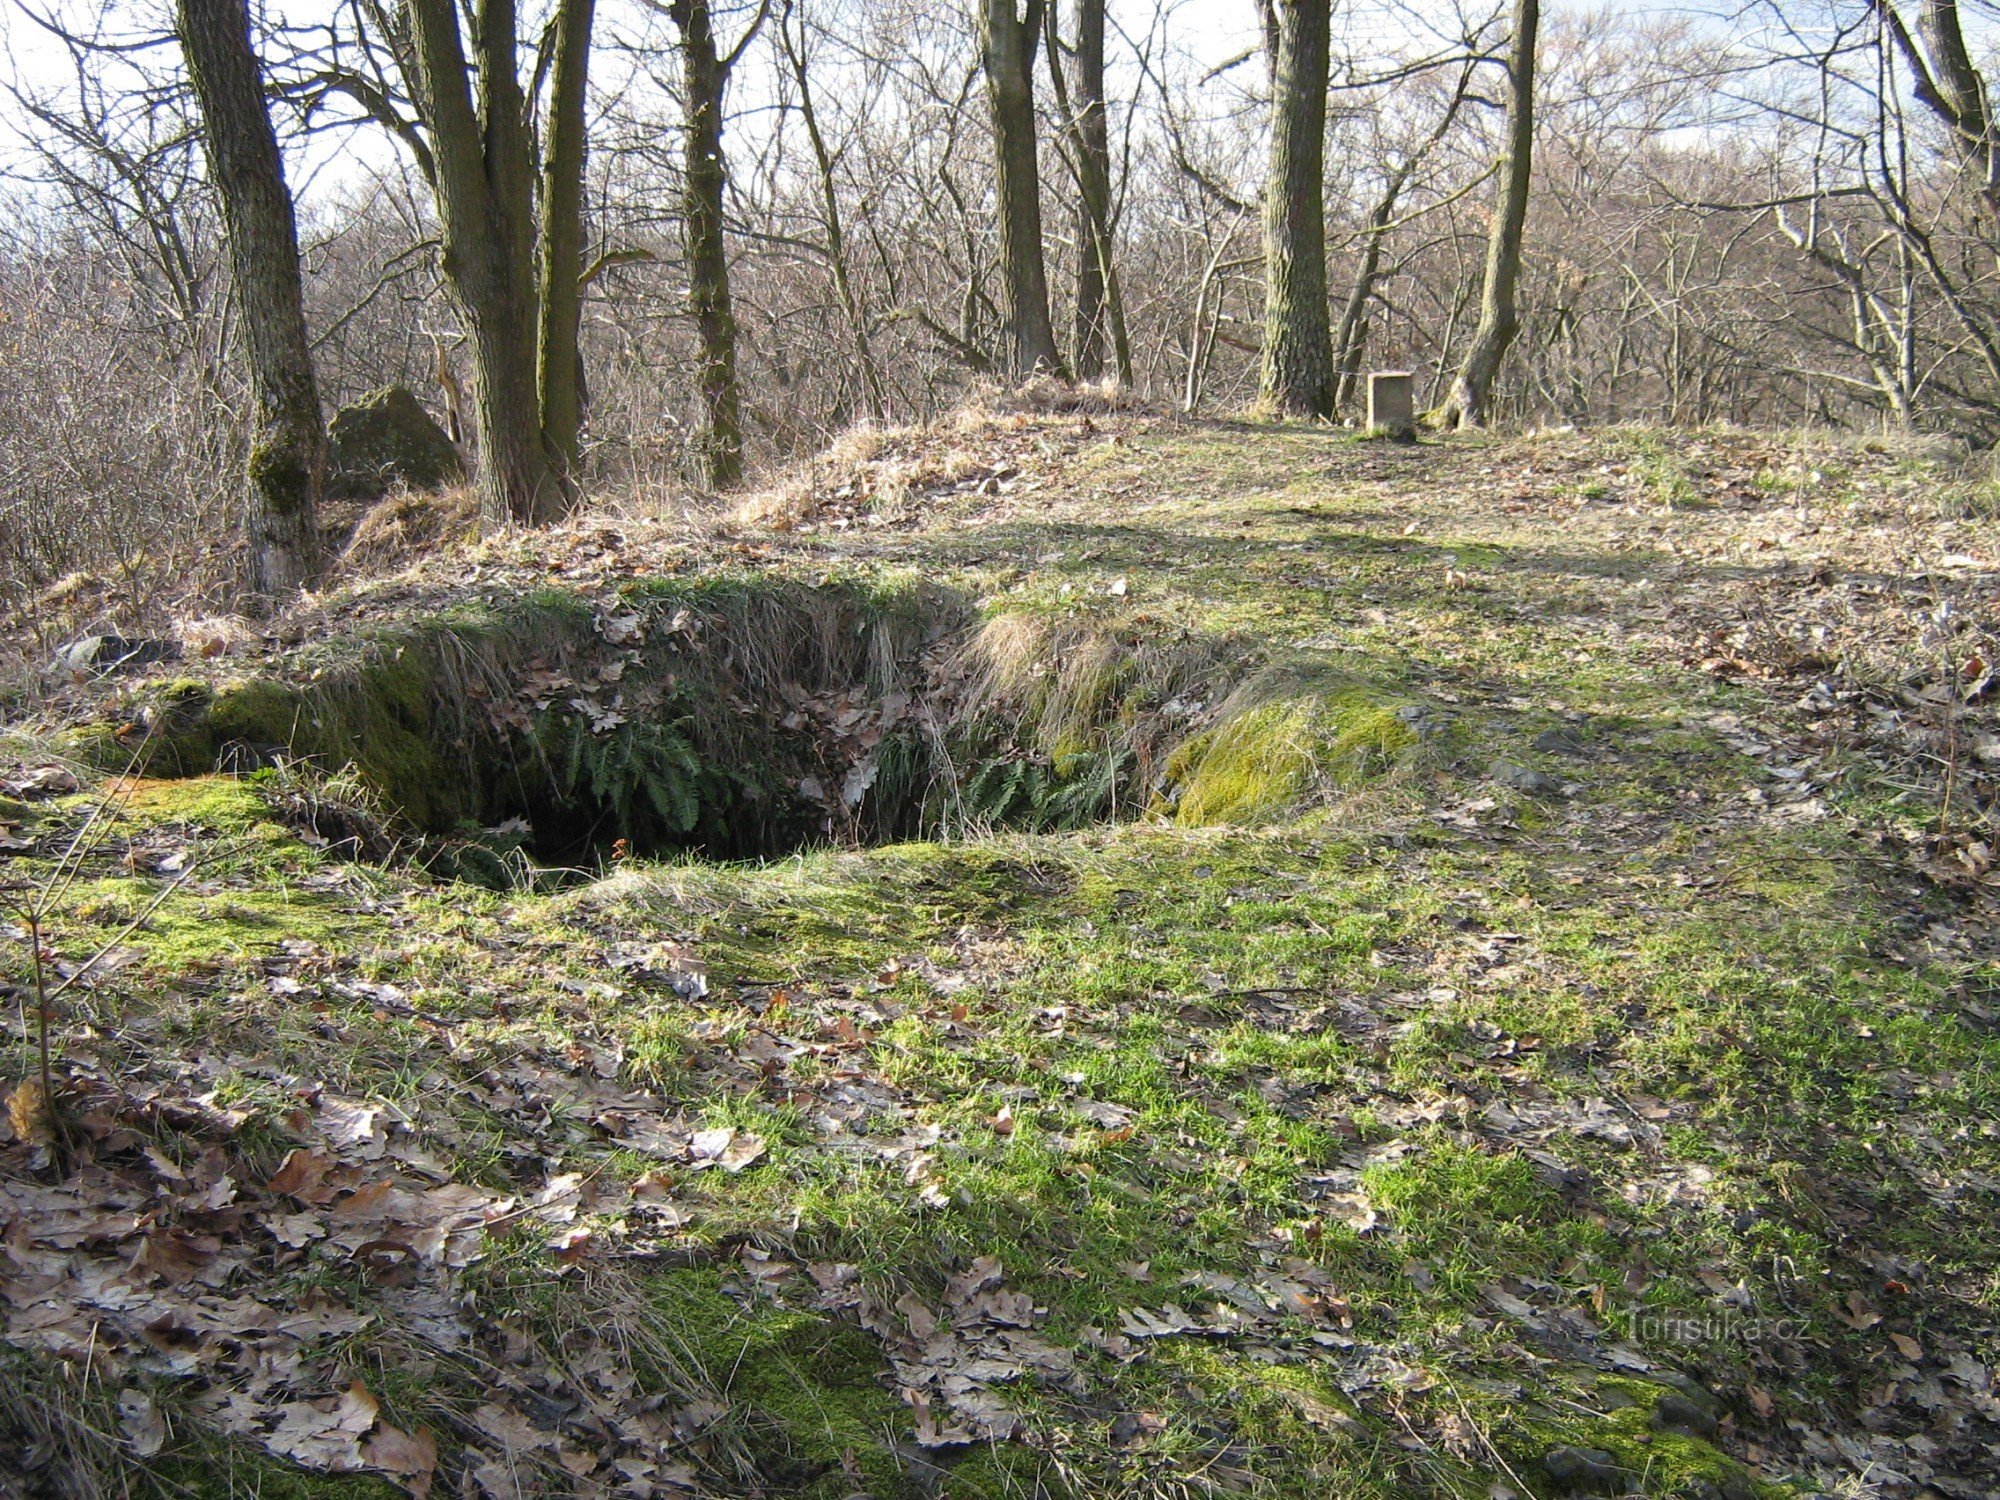 The remains of the well at Řebřík